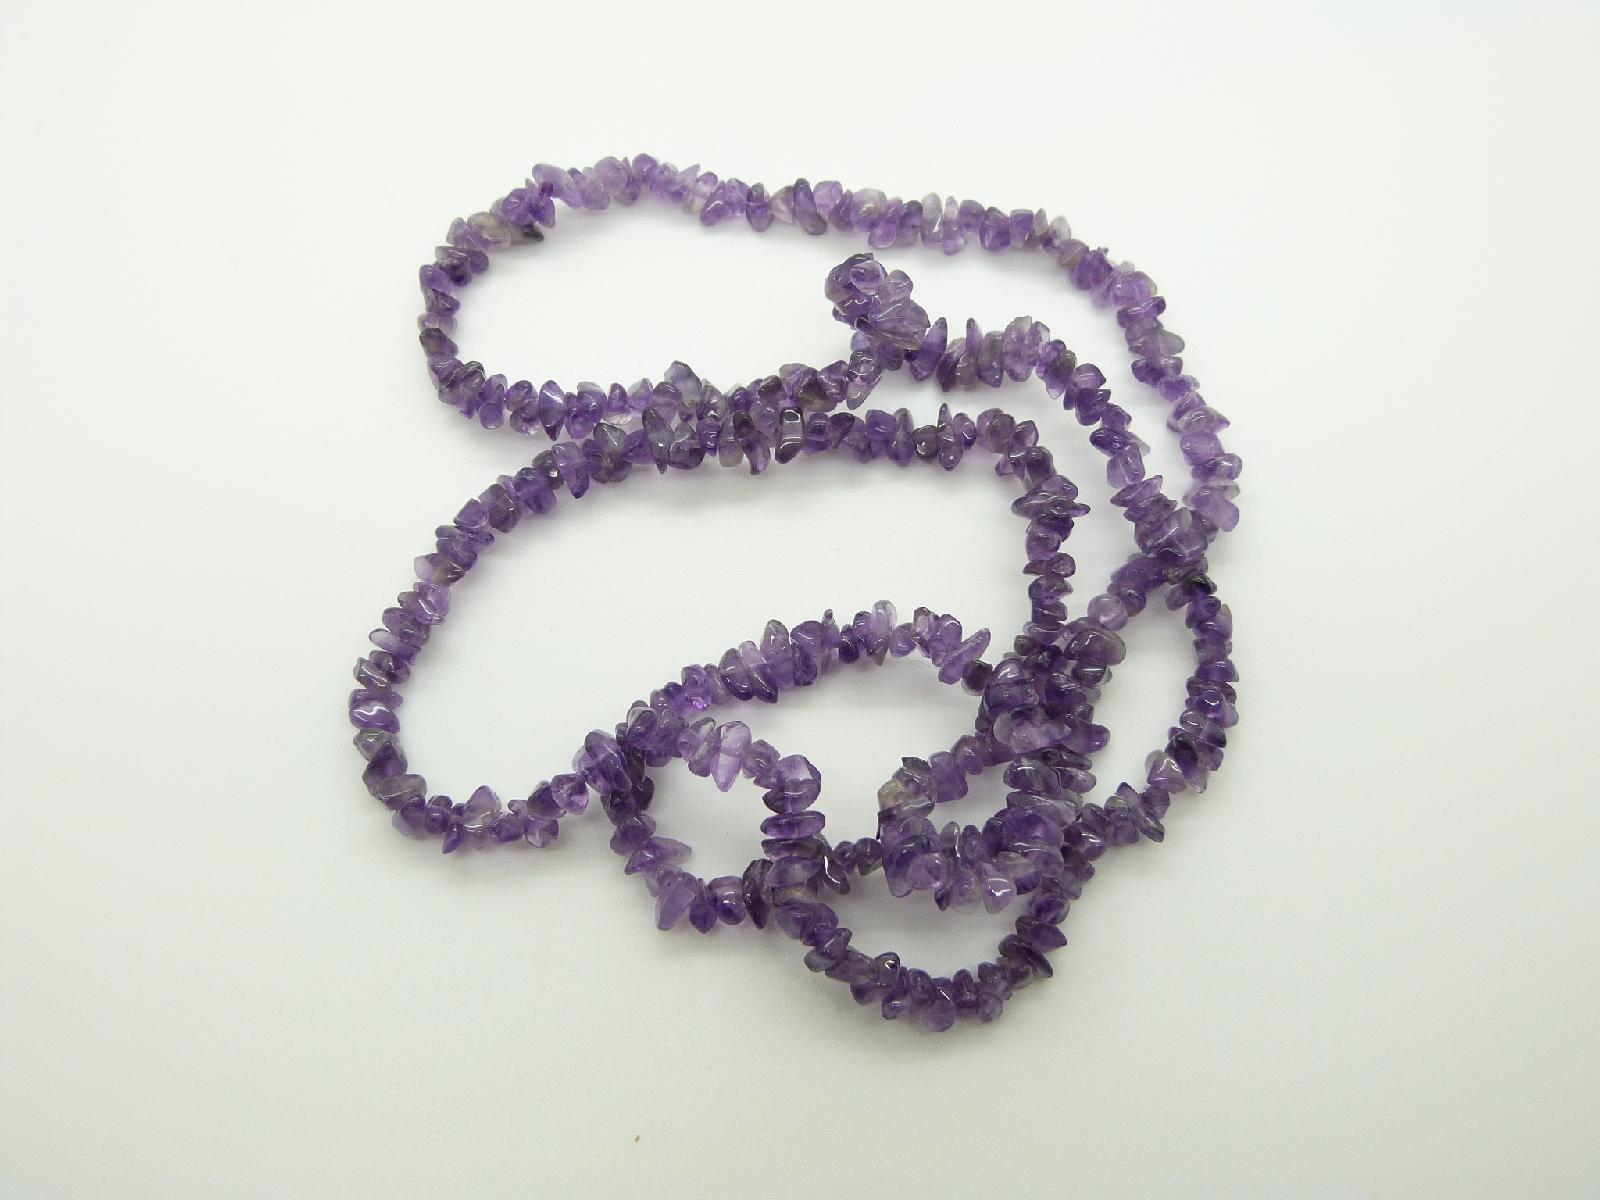 £18.00 - Very Pretty Long Real Amethyst Smooth Chip Bead Necklace